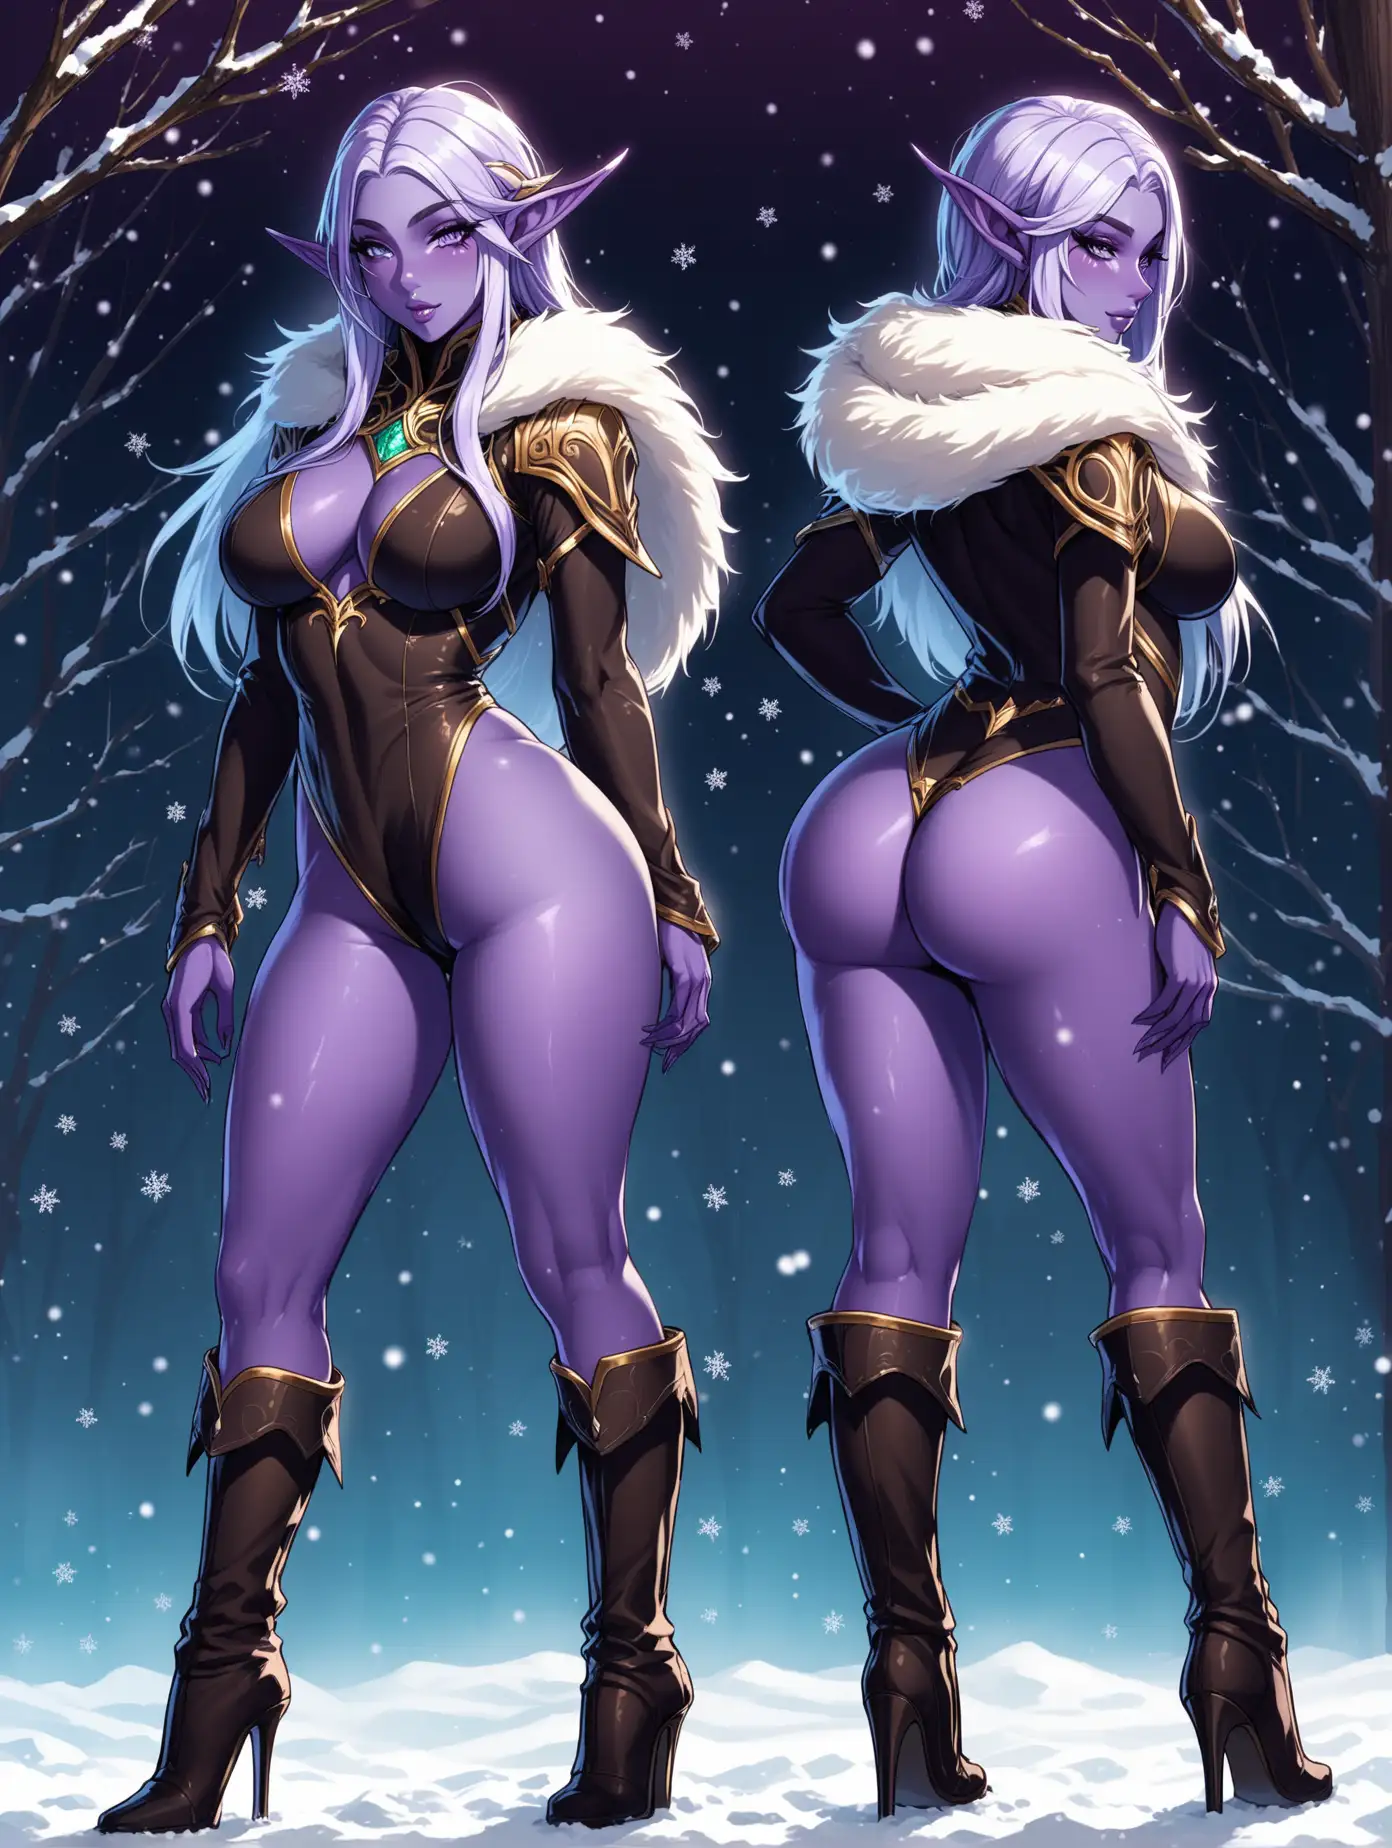 Sultry-Night-Elf-Woman-in-Stunning-Winter-Attire-and-High-Heel-Boots